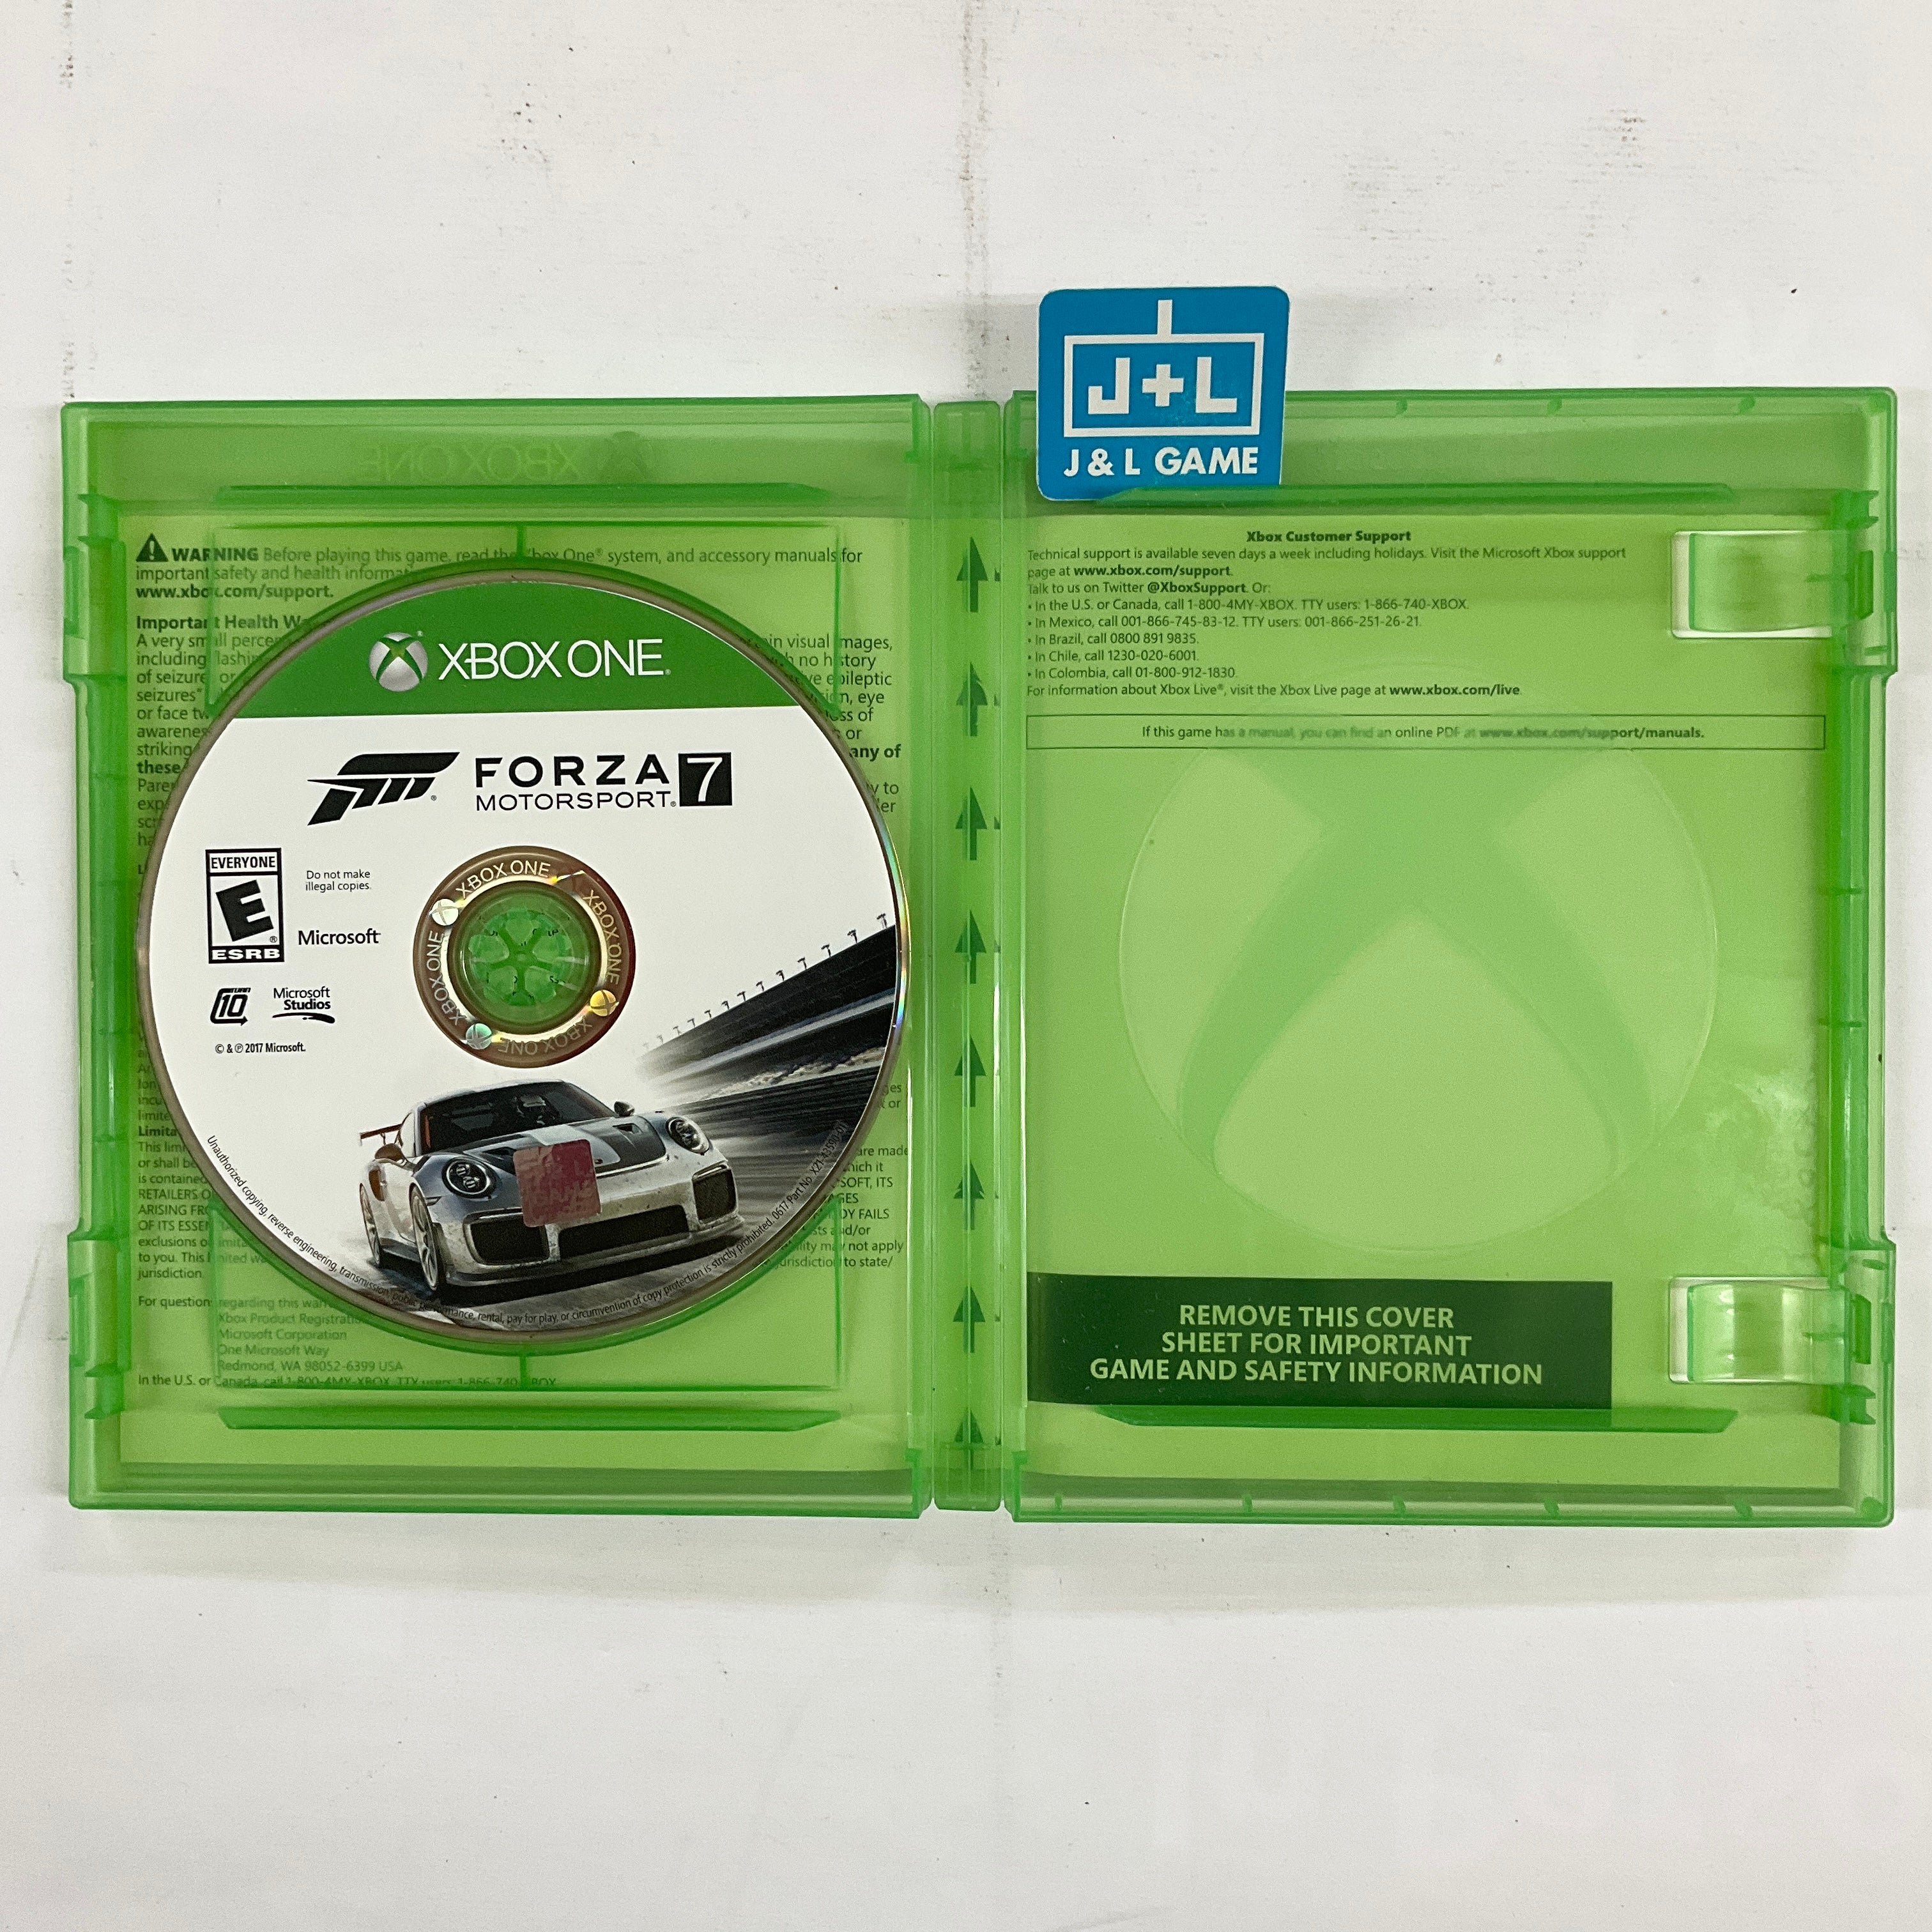 Forza Motorsport 7 - (XB1) Xbox One [Pre-Owned] Video Games Microsoft Game Studios   